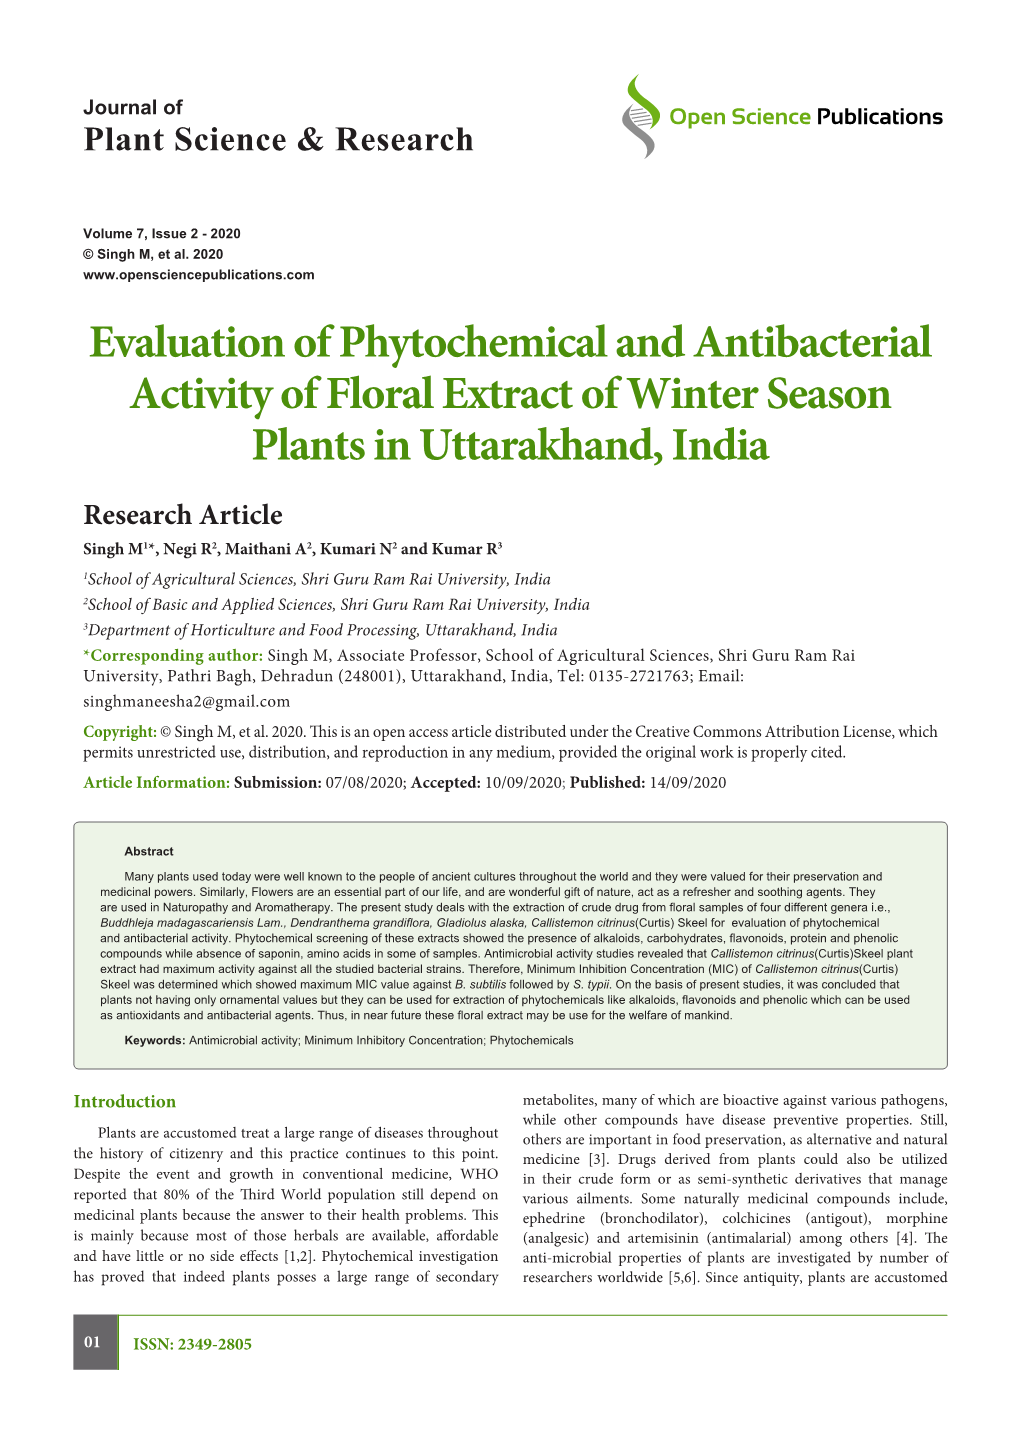 Evaluation of Phytochemical and Antibacterial Activity of Floral Extract of Winter Season Plants in Uttarakhand, India